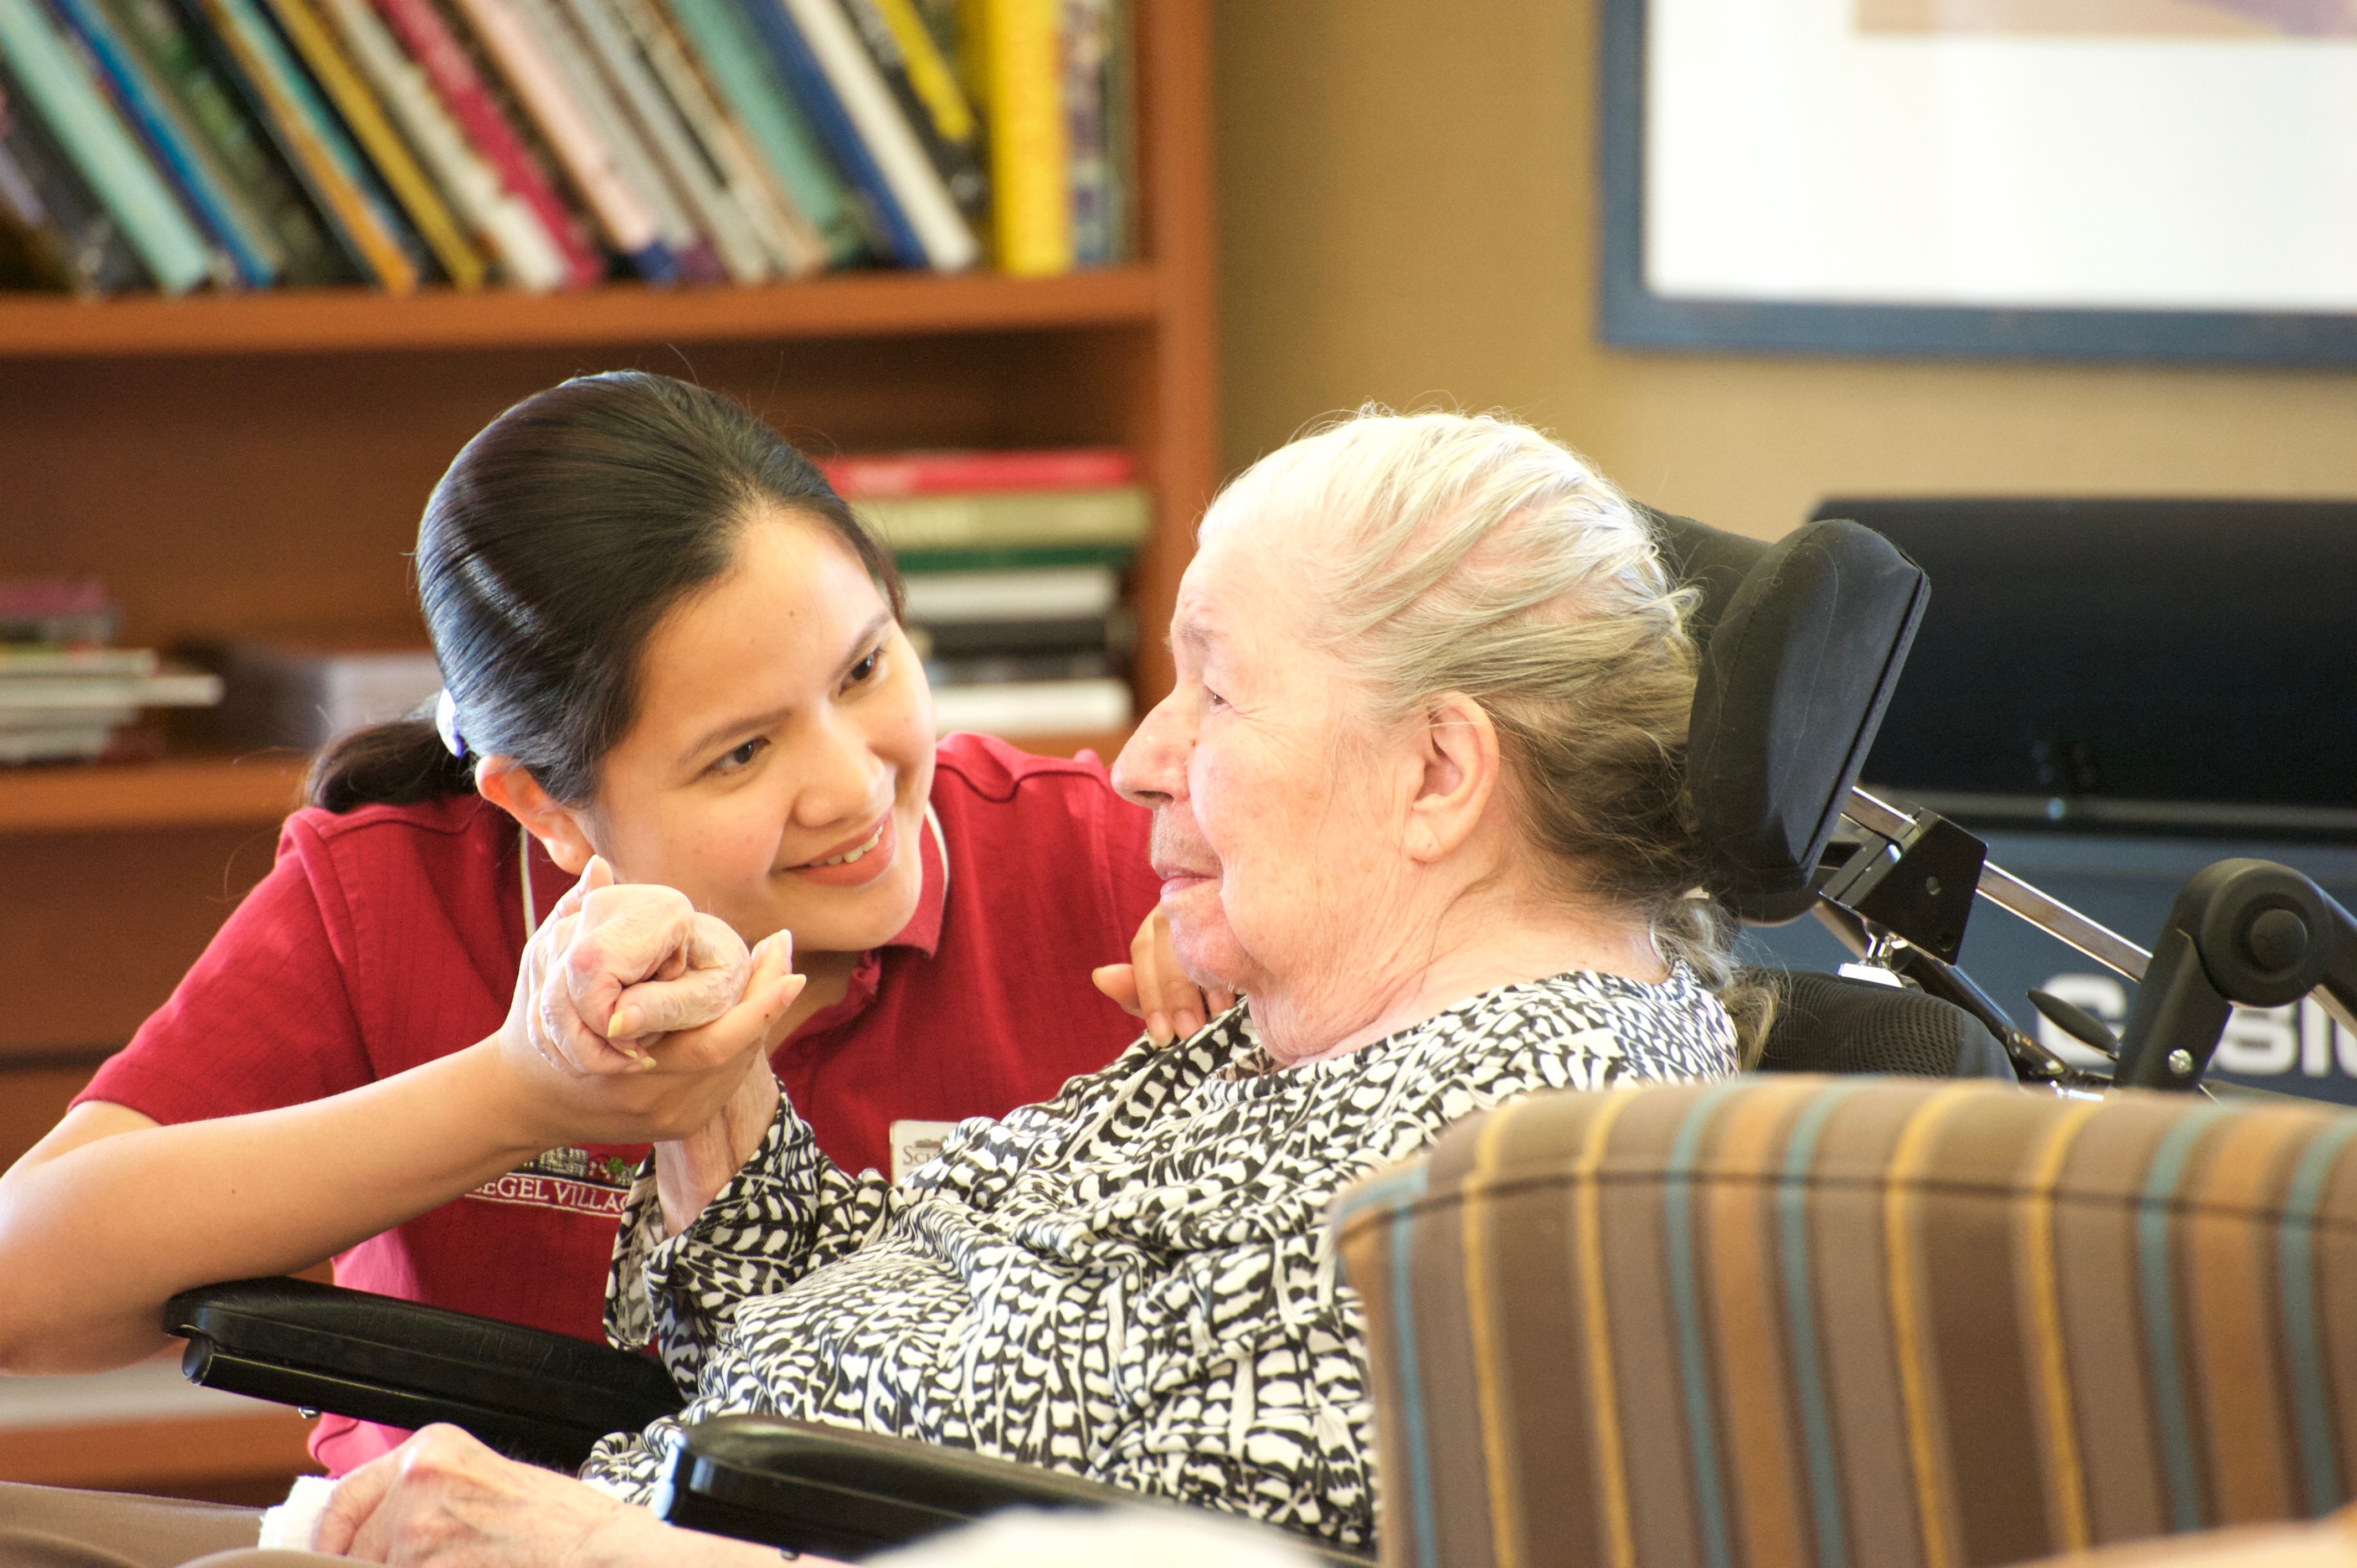 Team member chatting with a resident in a wheelchair